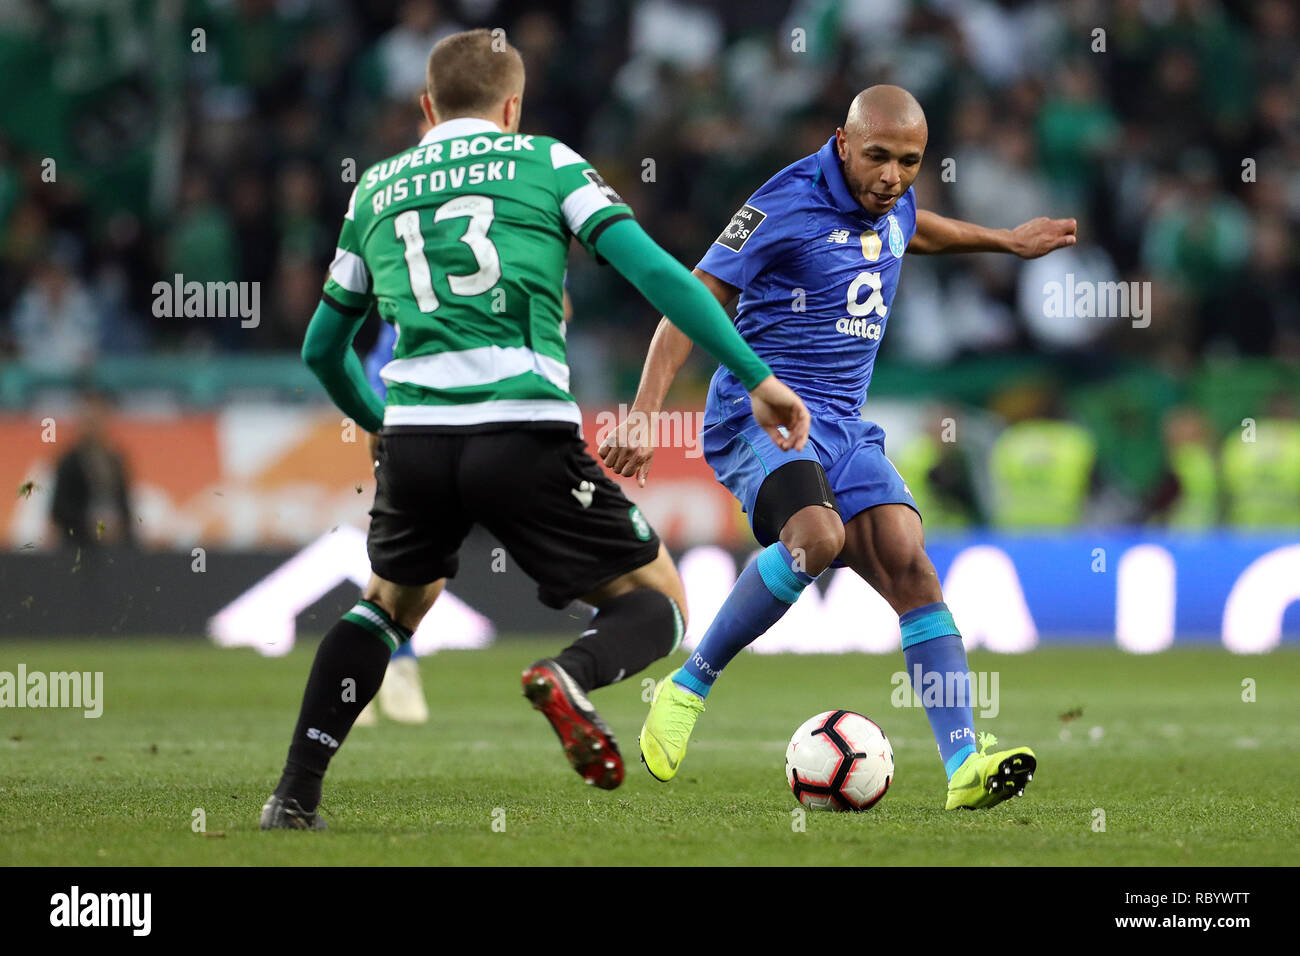 Yacine Brahimi of FC Porto seen in action during the League NOS 2018/19 football match between Sporting CP and FC Porto. (Final score: Sporting CP 0 - 0 FC Porto) Stock Photo